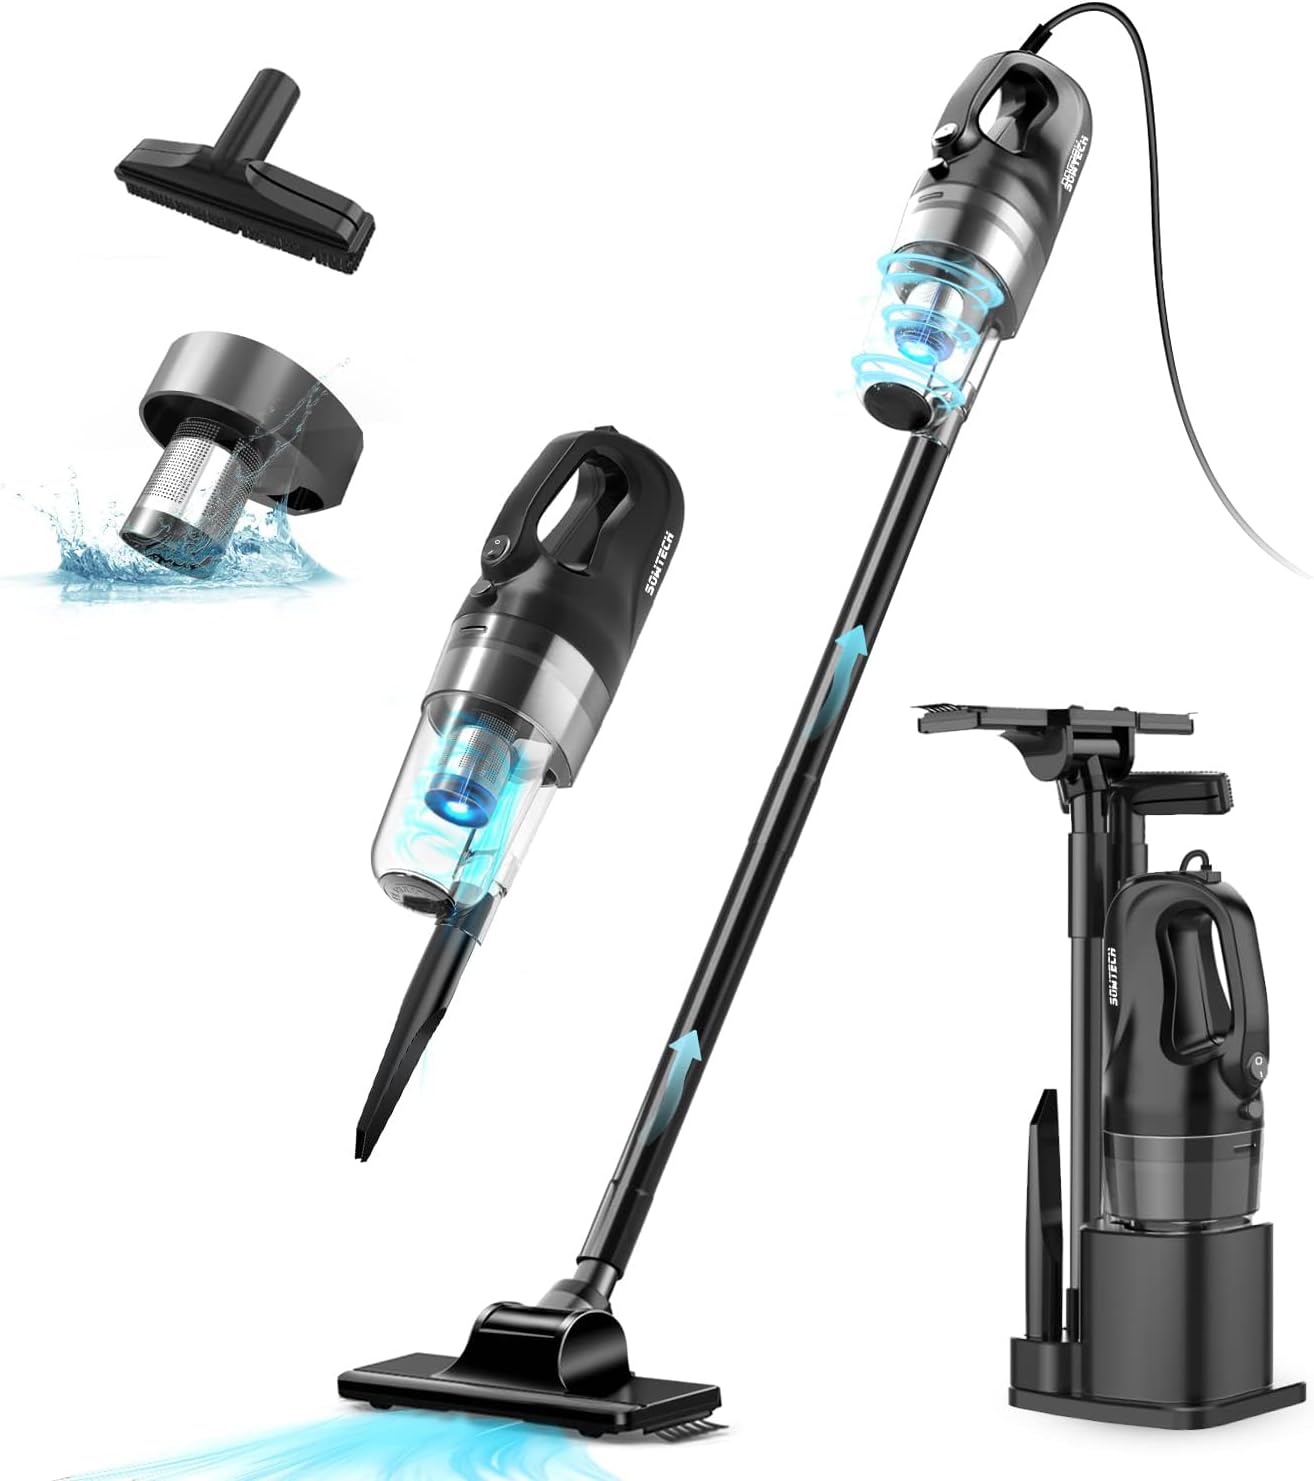 SOWTECH Corded Stick Vacuum Cleaner, 17Kpa Powerful [...]